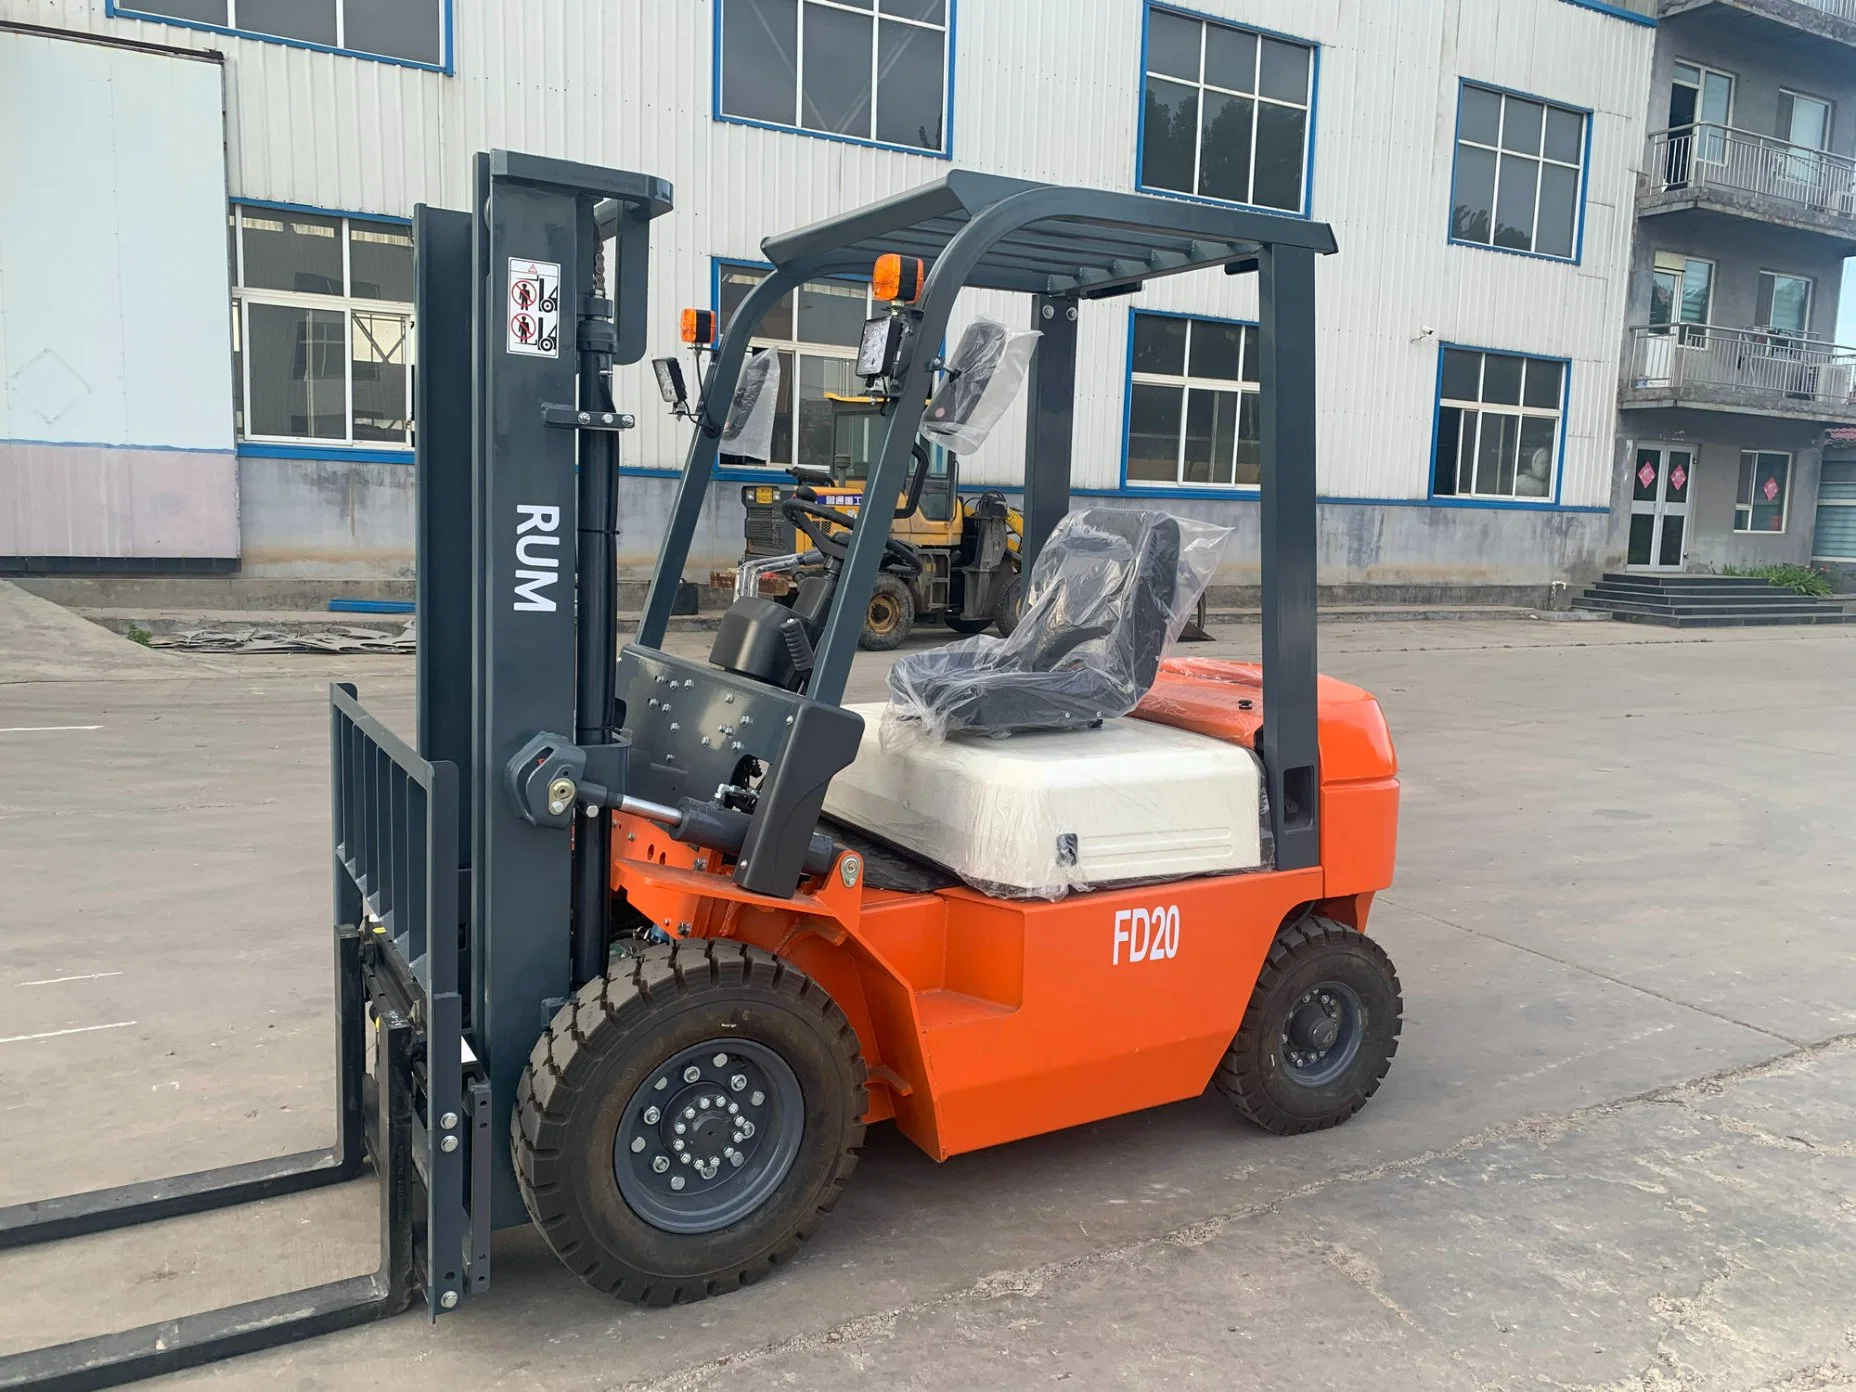 New Diesel Forklift Truck 2ton Fd20 Auto/Mannual Transmission Forklift Chinese/Japan/USA Engine Handling Equipment for Sale